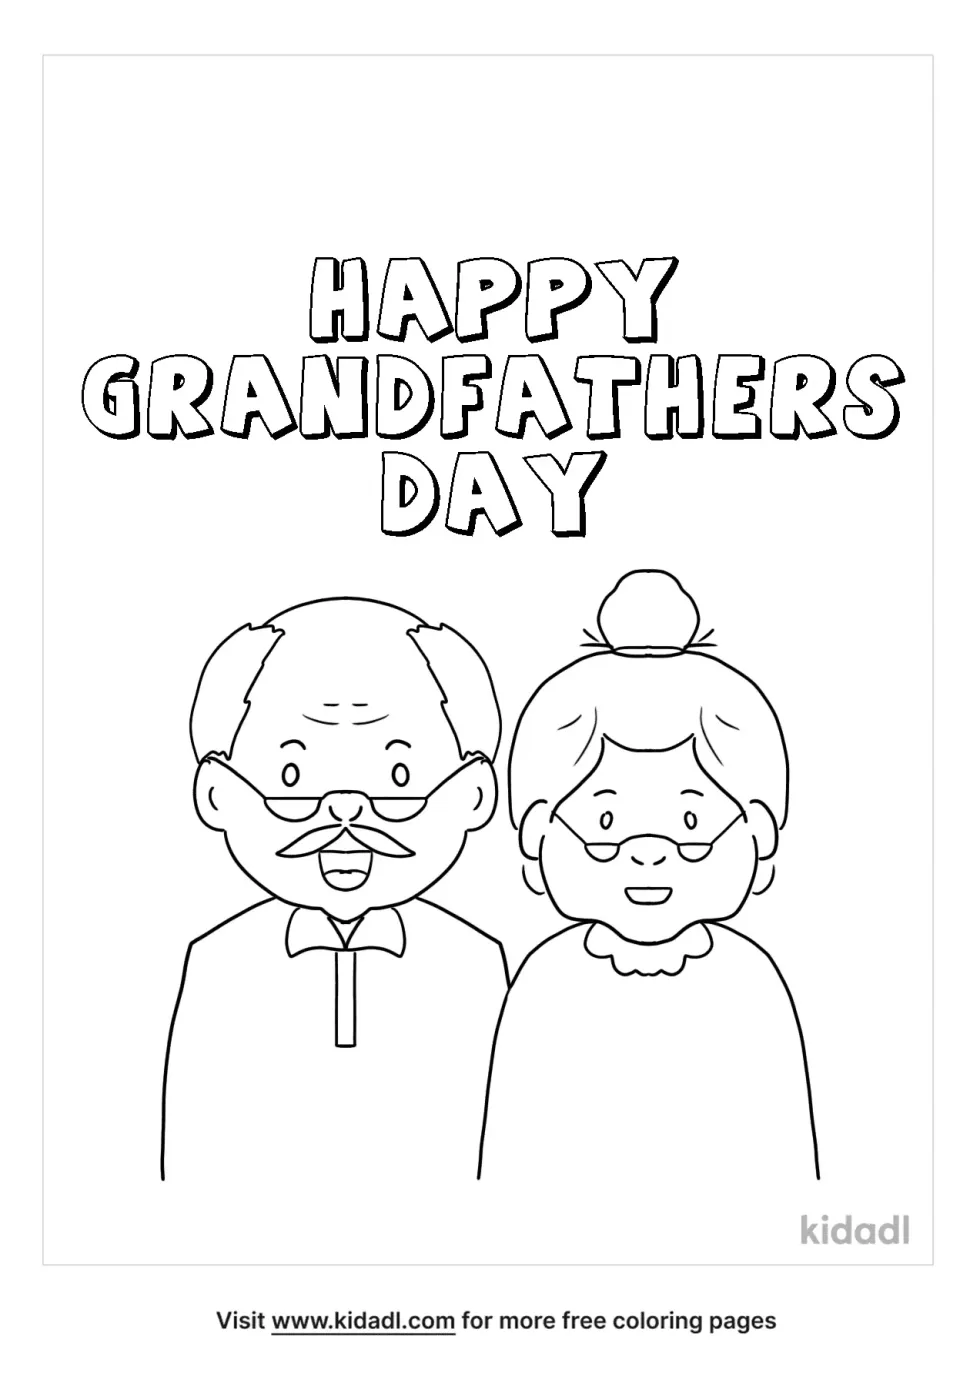 Happy Grandfathers Day